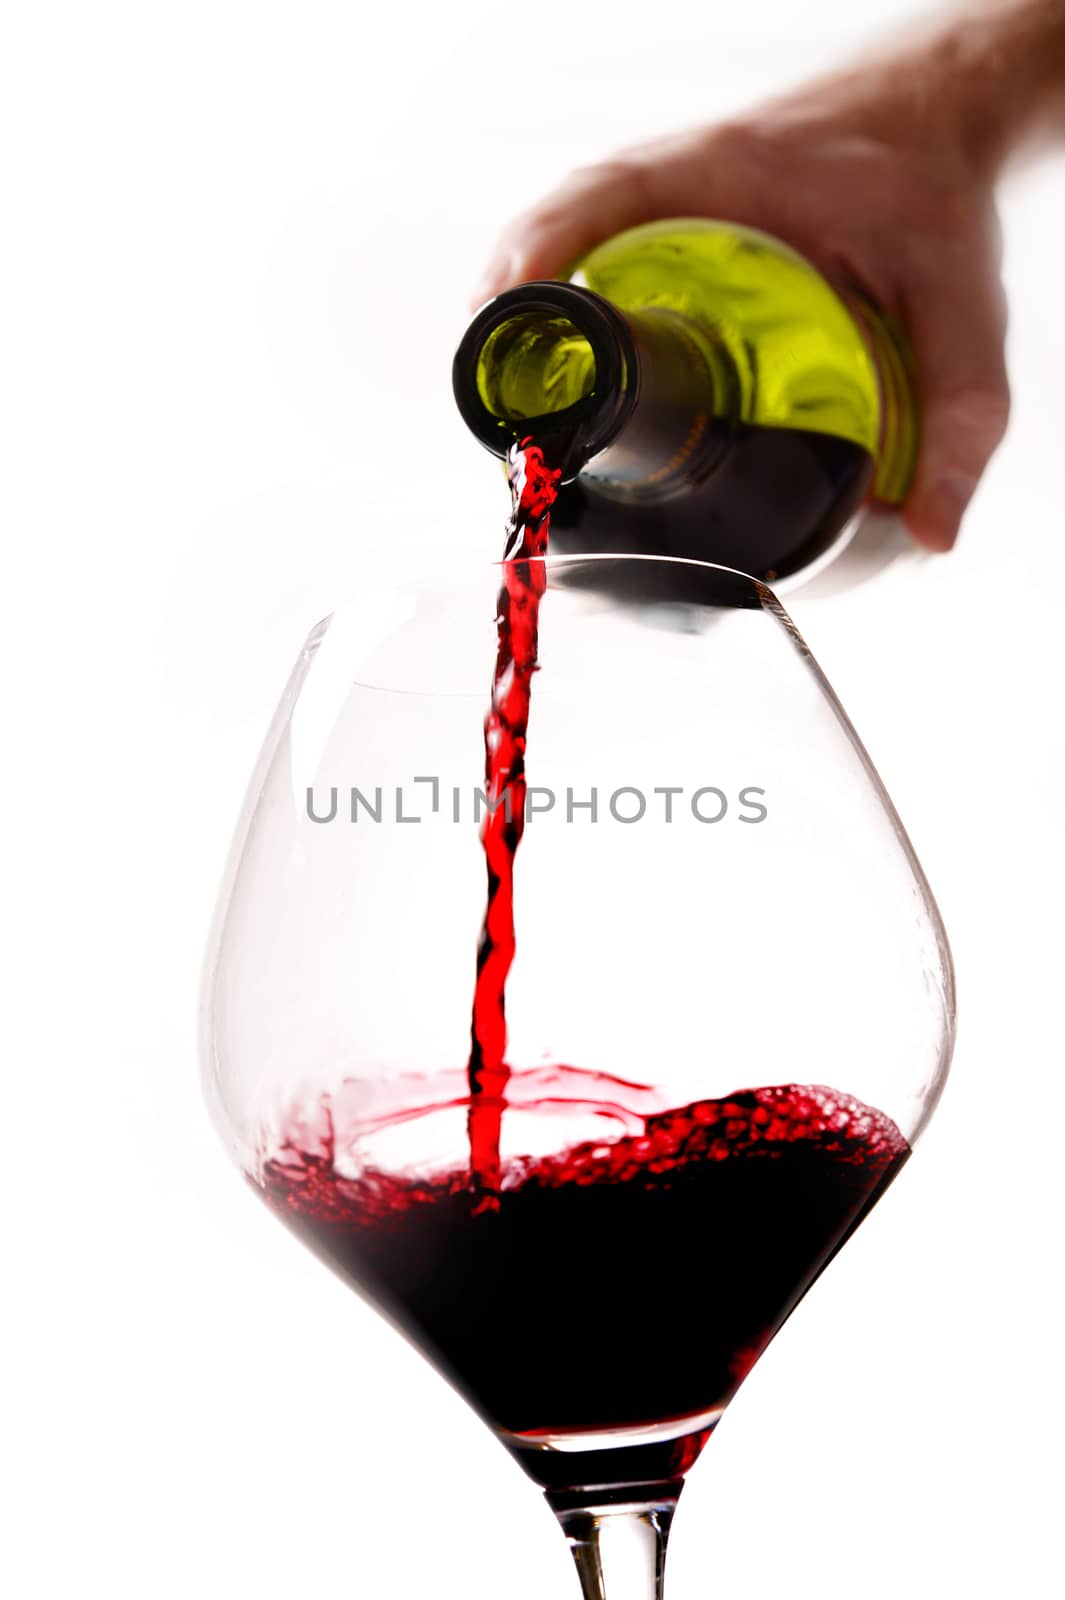 Man Hand holding Bottle filling Glass with Red Wine isolated on white background